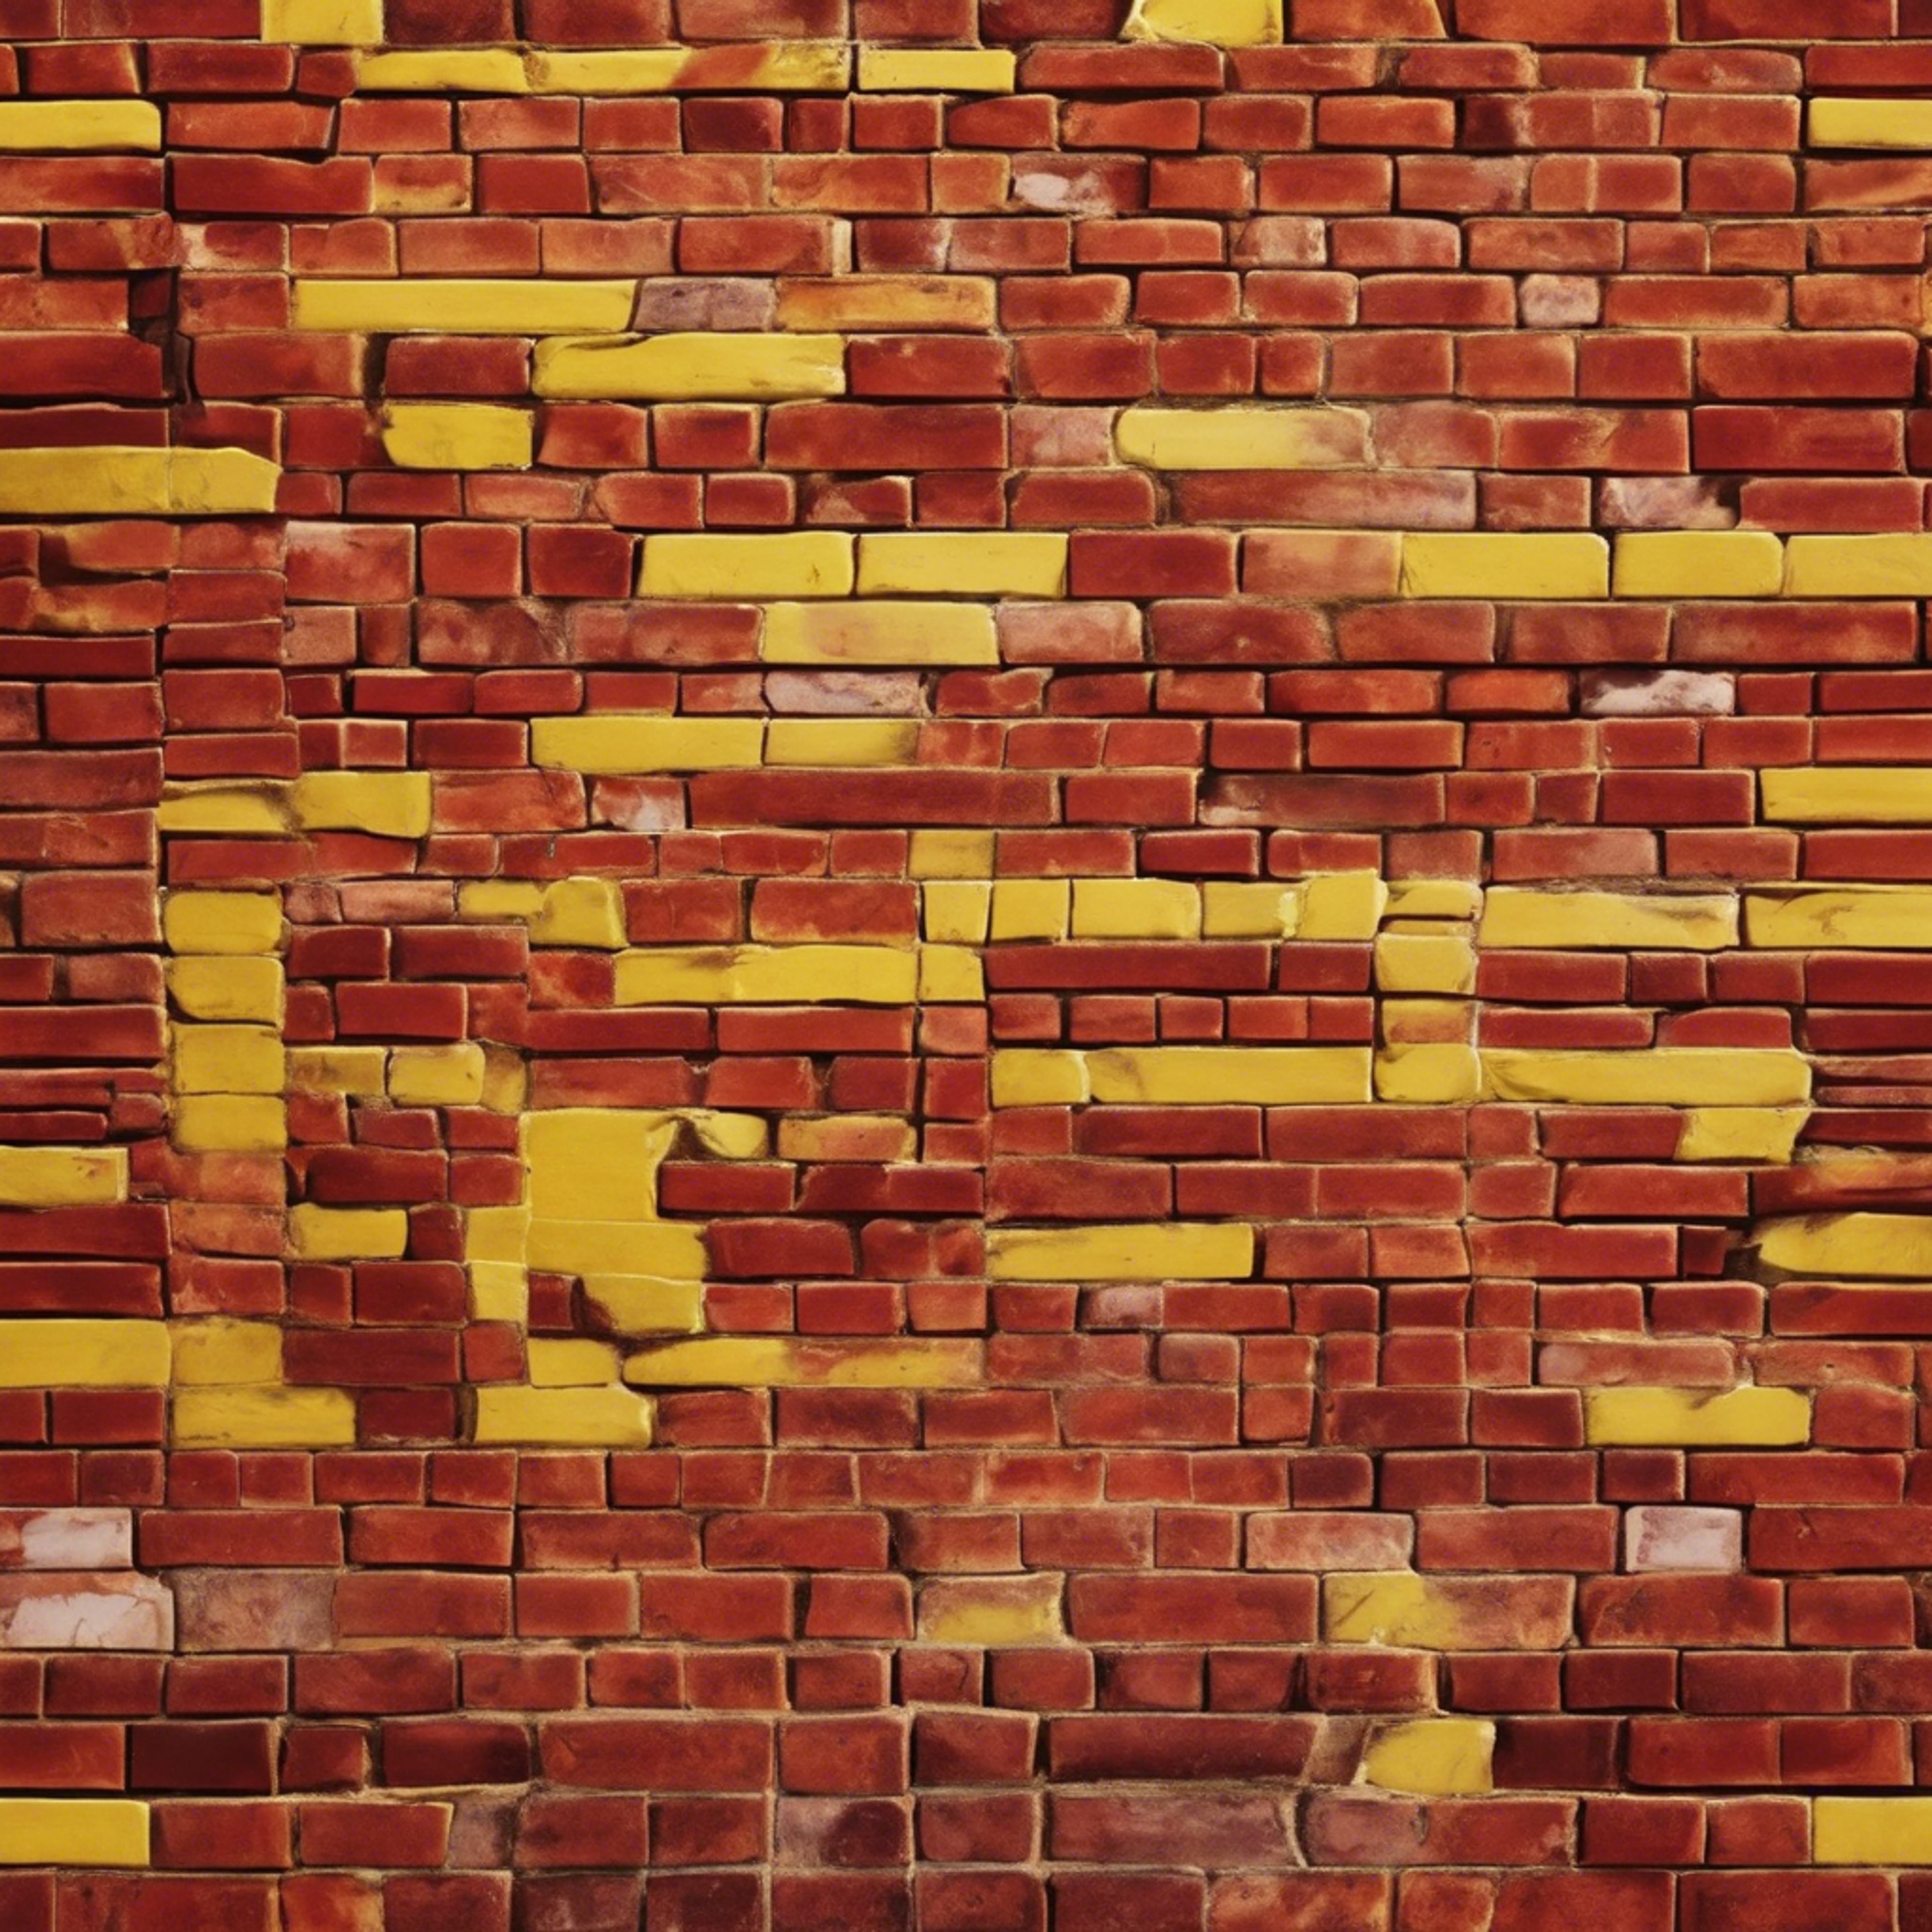 Red and yellow brick pattern seen through the illusion of a watery surface - the bricks appear slightly distorted yet colorful. 벽지[6ac5a5324f9a41fcbc3c]